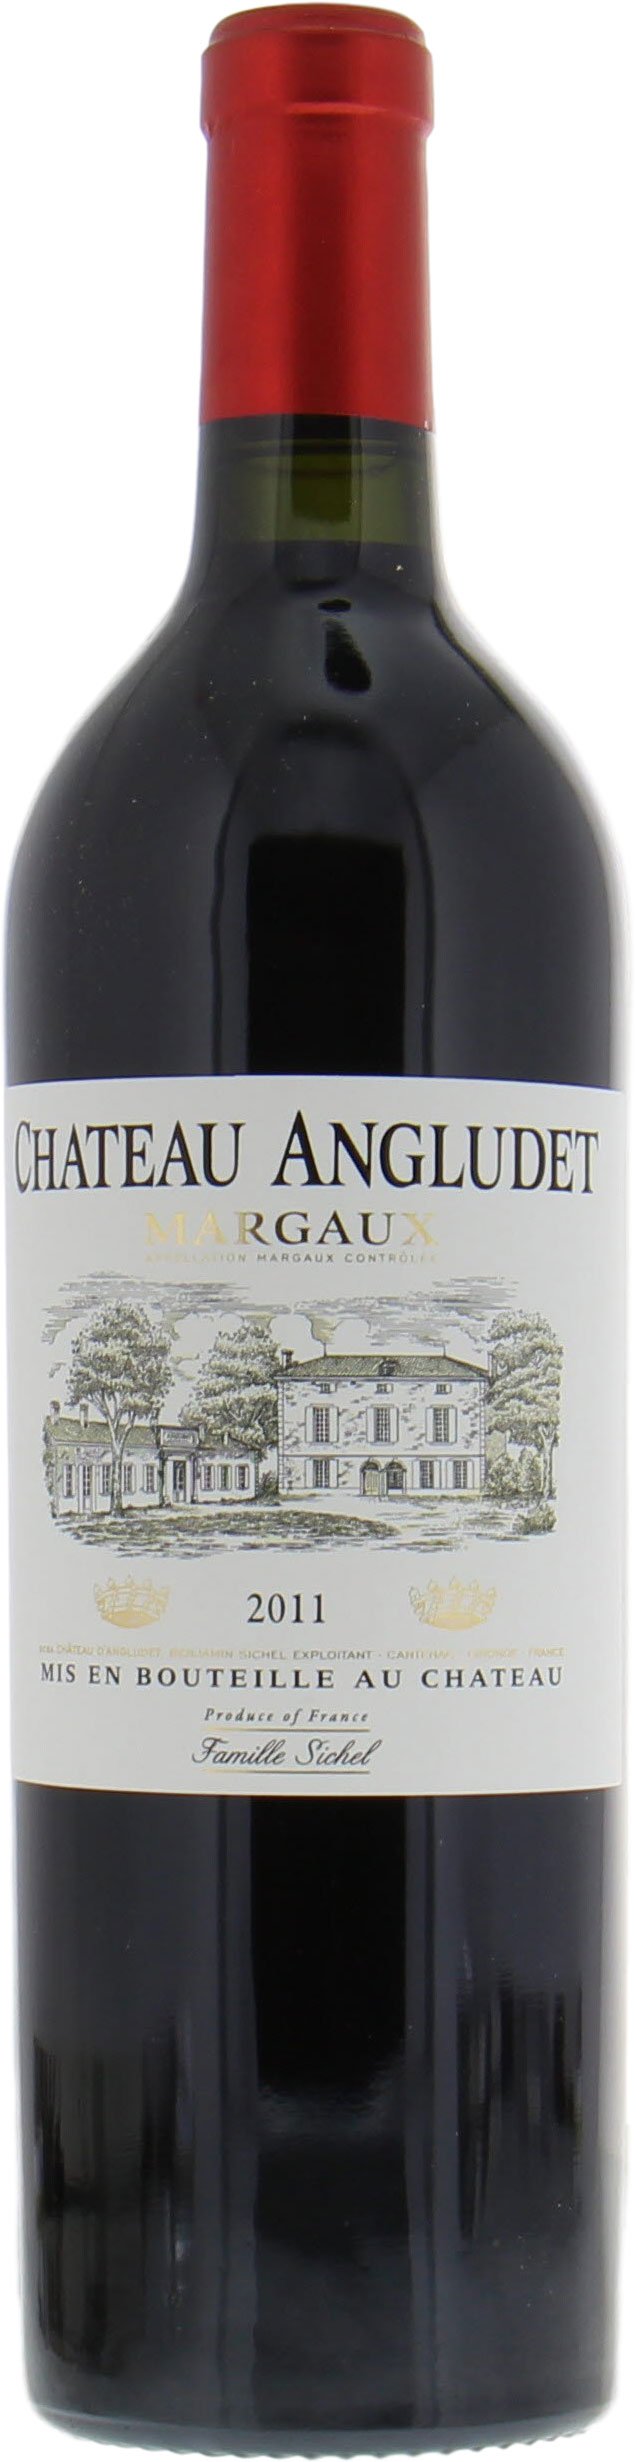 Chateau Angludet - Chateau Angludet 2011 From Original Wooden Case